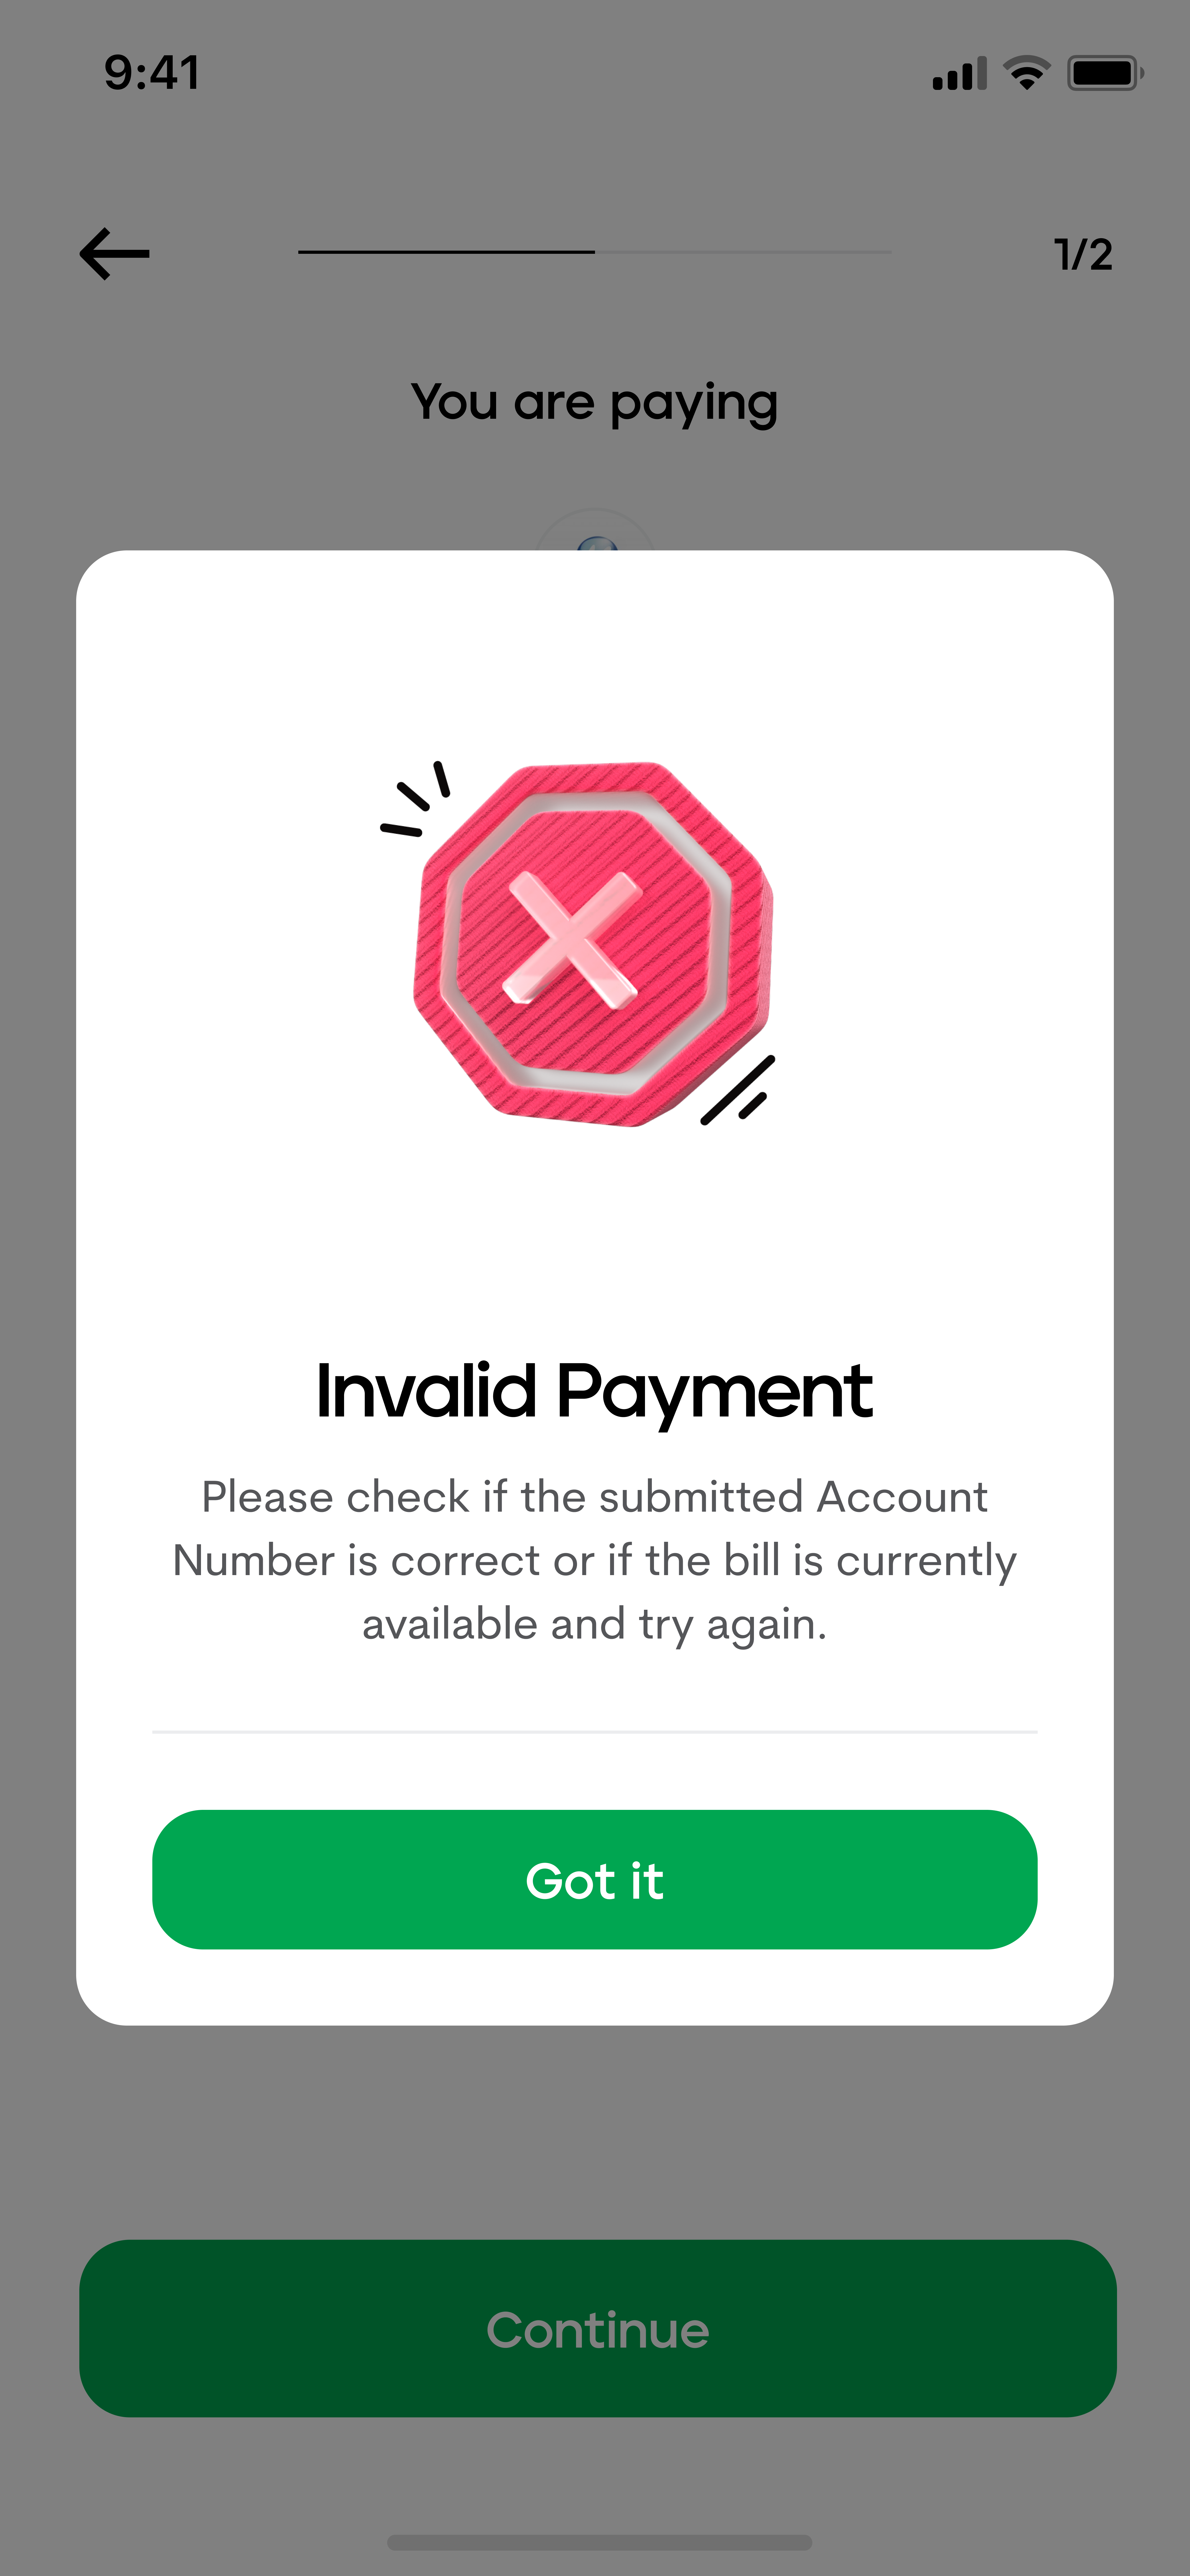 By identifying that the issue is an invalid payment, the user no longer wonders if it’s a merchant issue, a failed internet connection, or something else. By narrowing down the field of issues, the user can feel less overwhelmed by the problem.